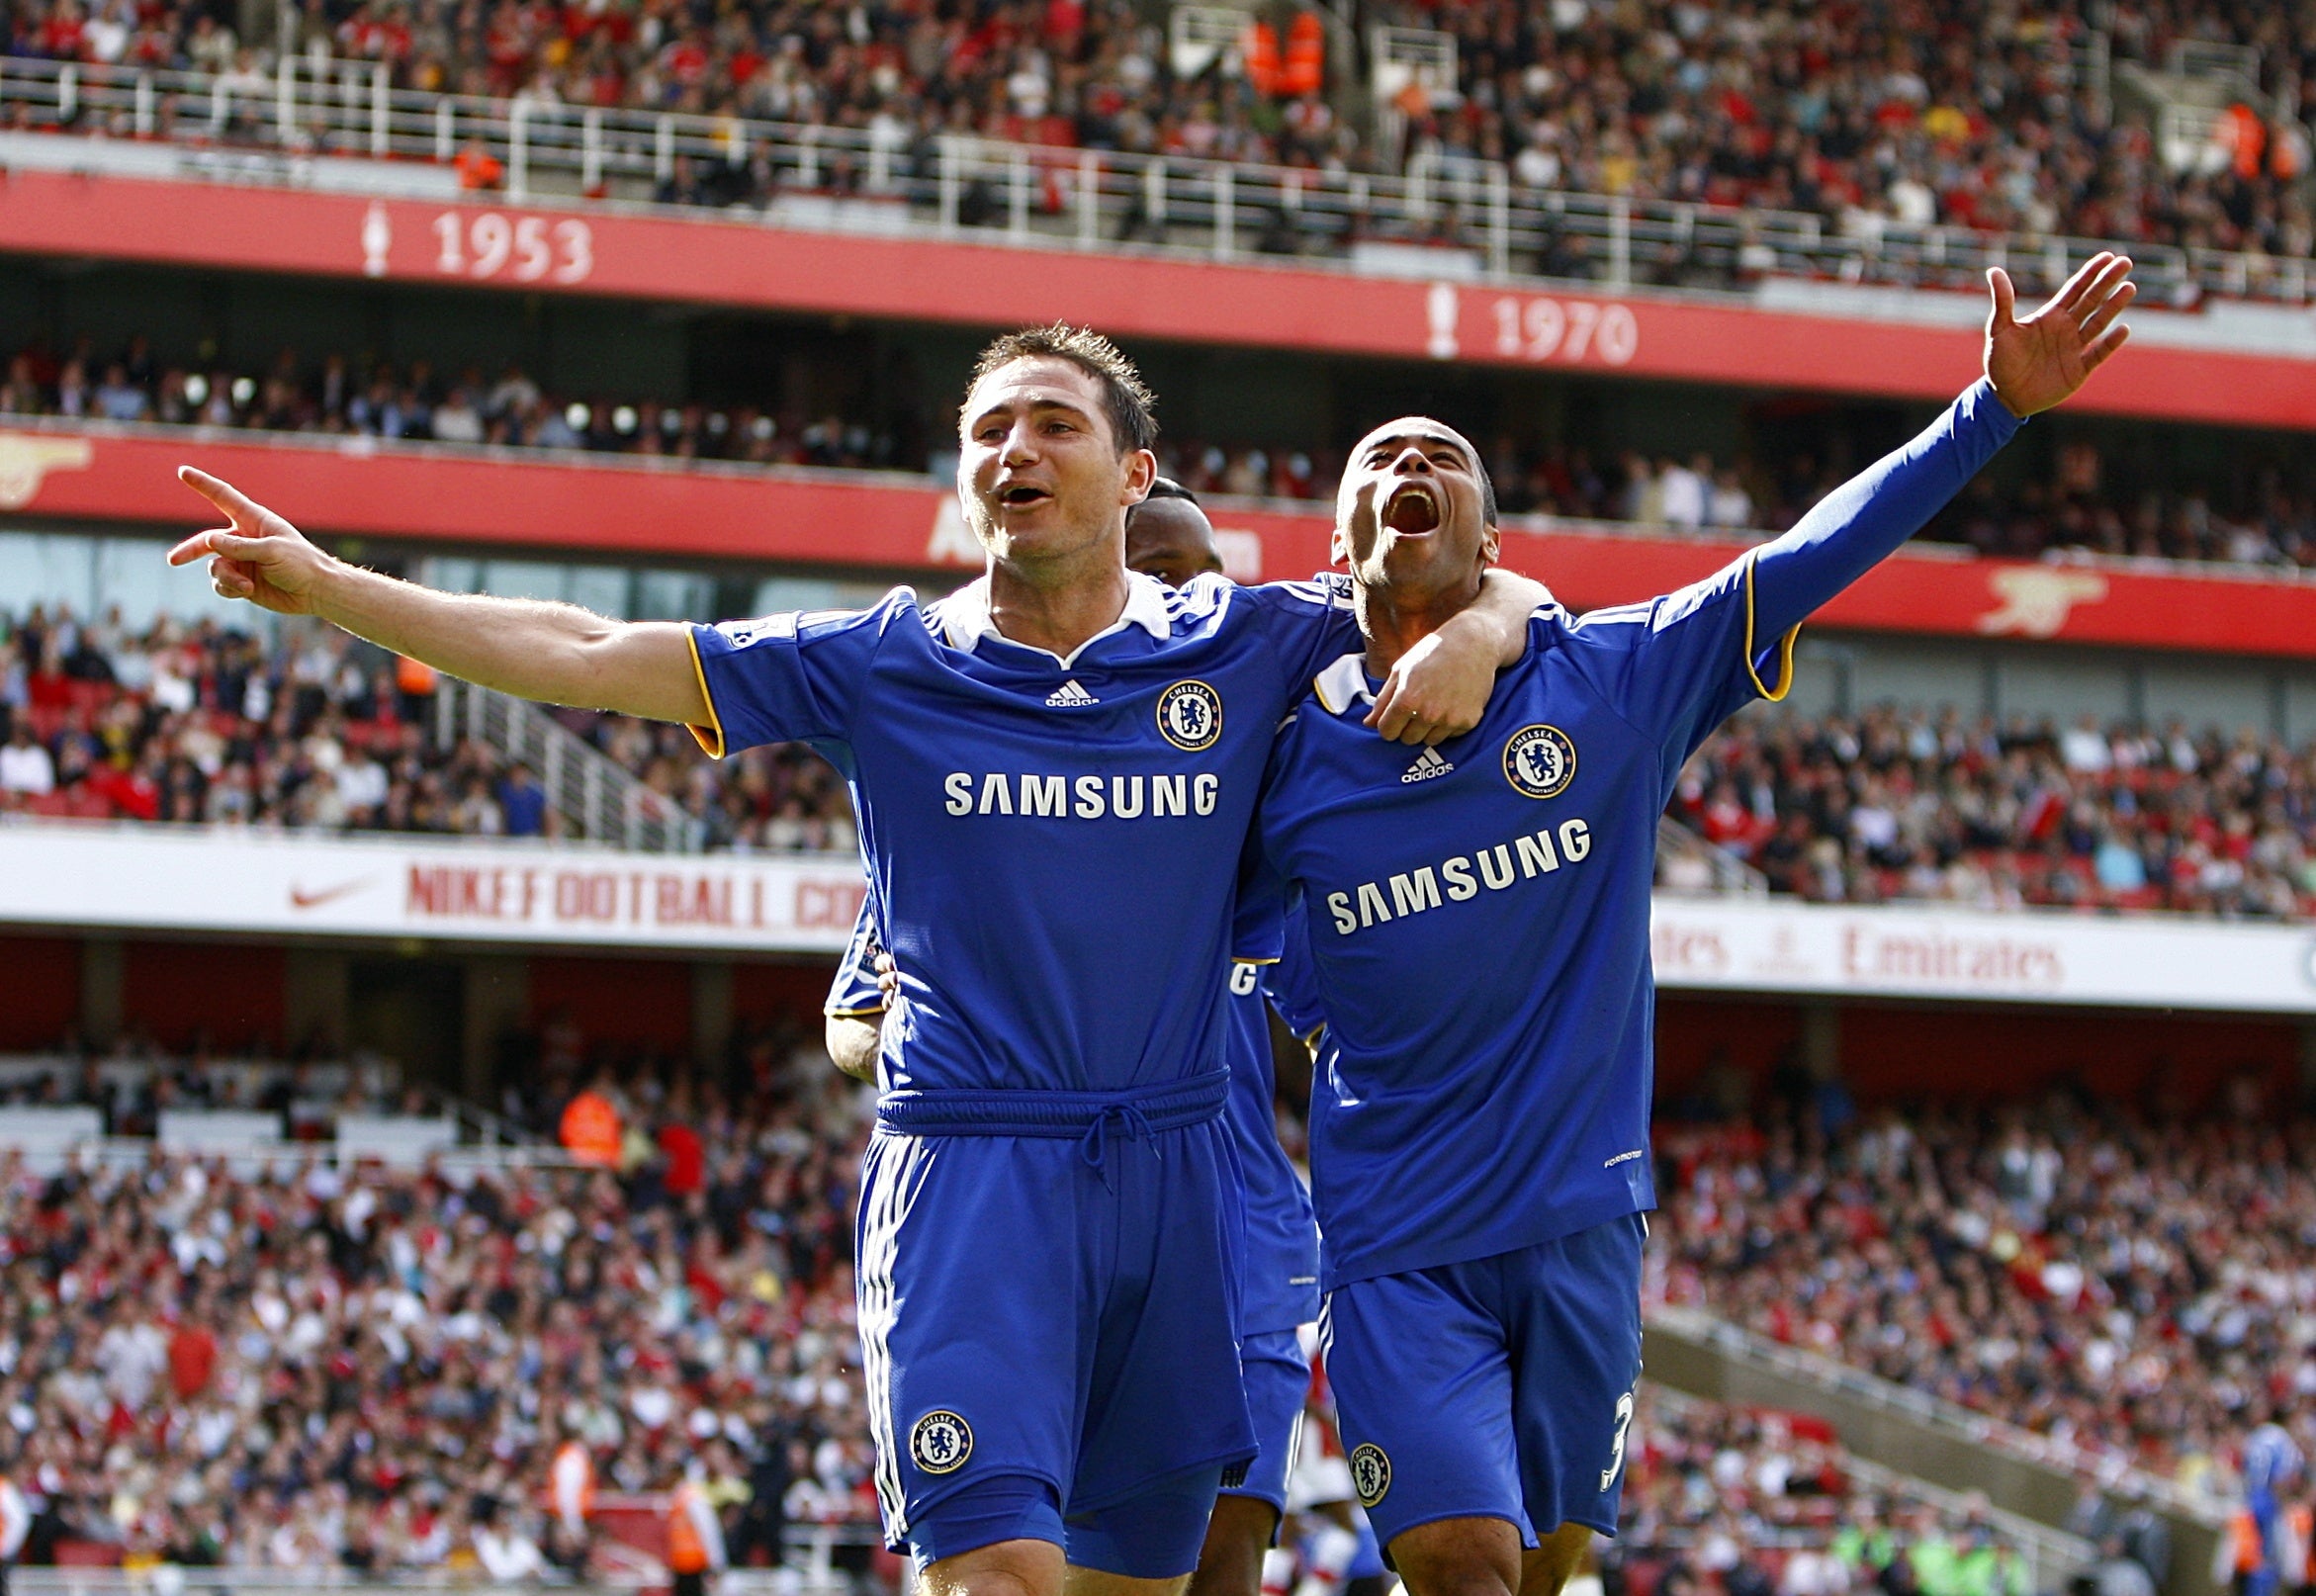 Lampard (left) will link up with Ashley Cole (right) once again (Sean Dempsey/PA)